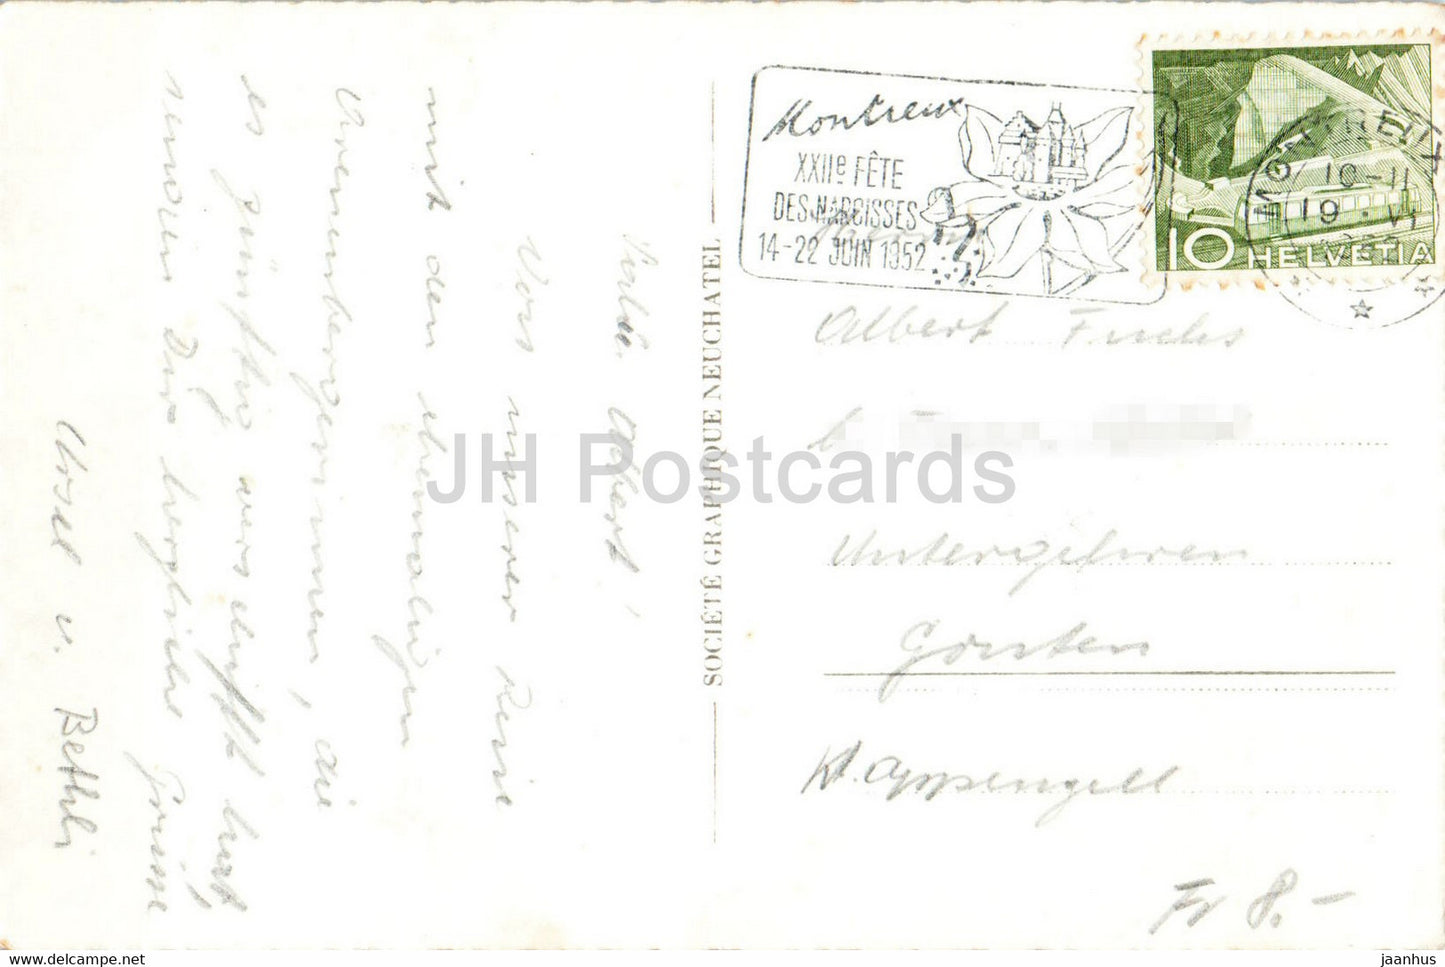 Montreux - Clarens - 7730 - 1952 - old postcard - Switzerland - used